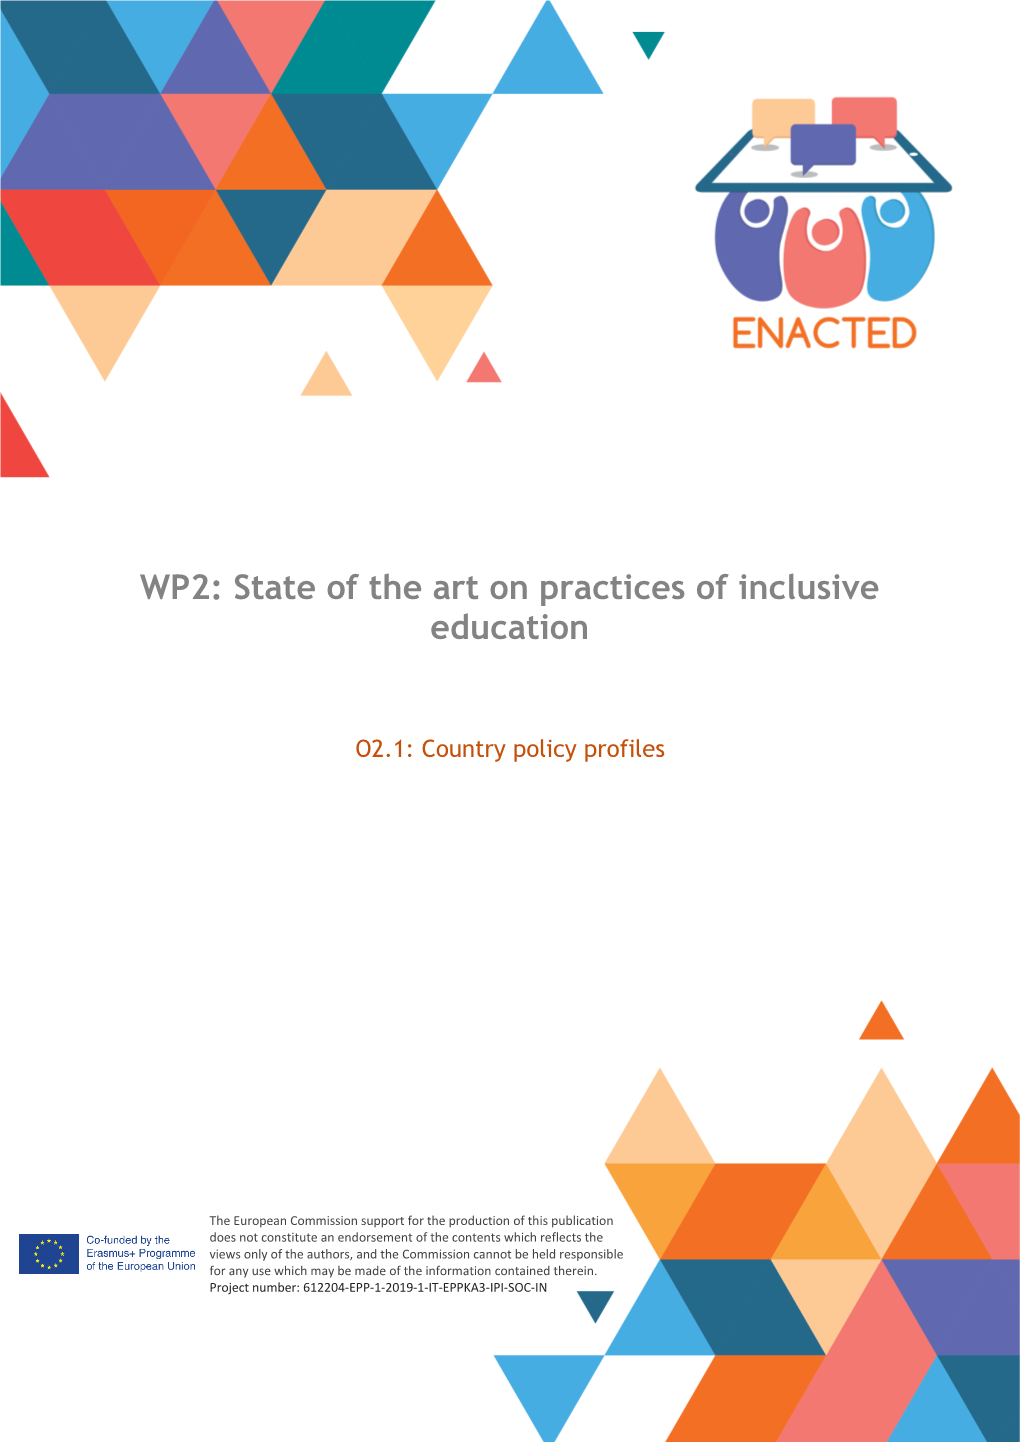 WP2: State of the Art on Practices of Inclusive Education